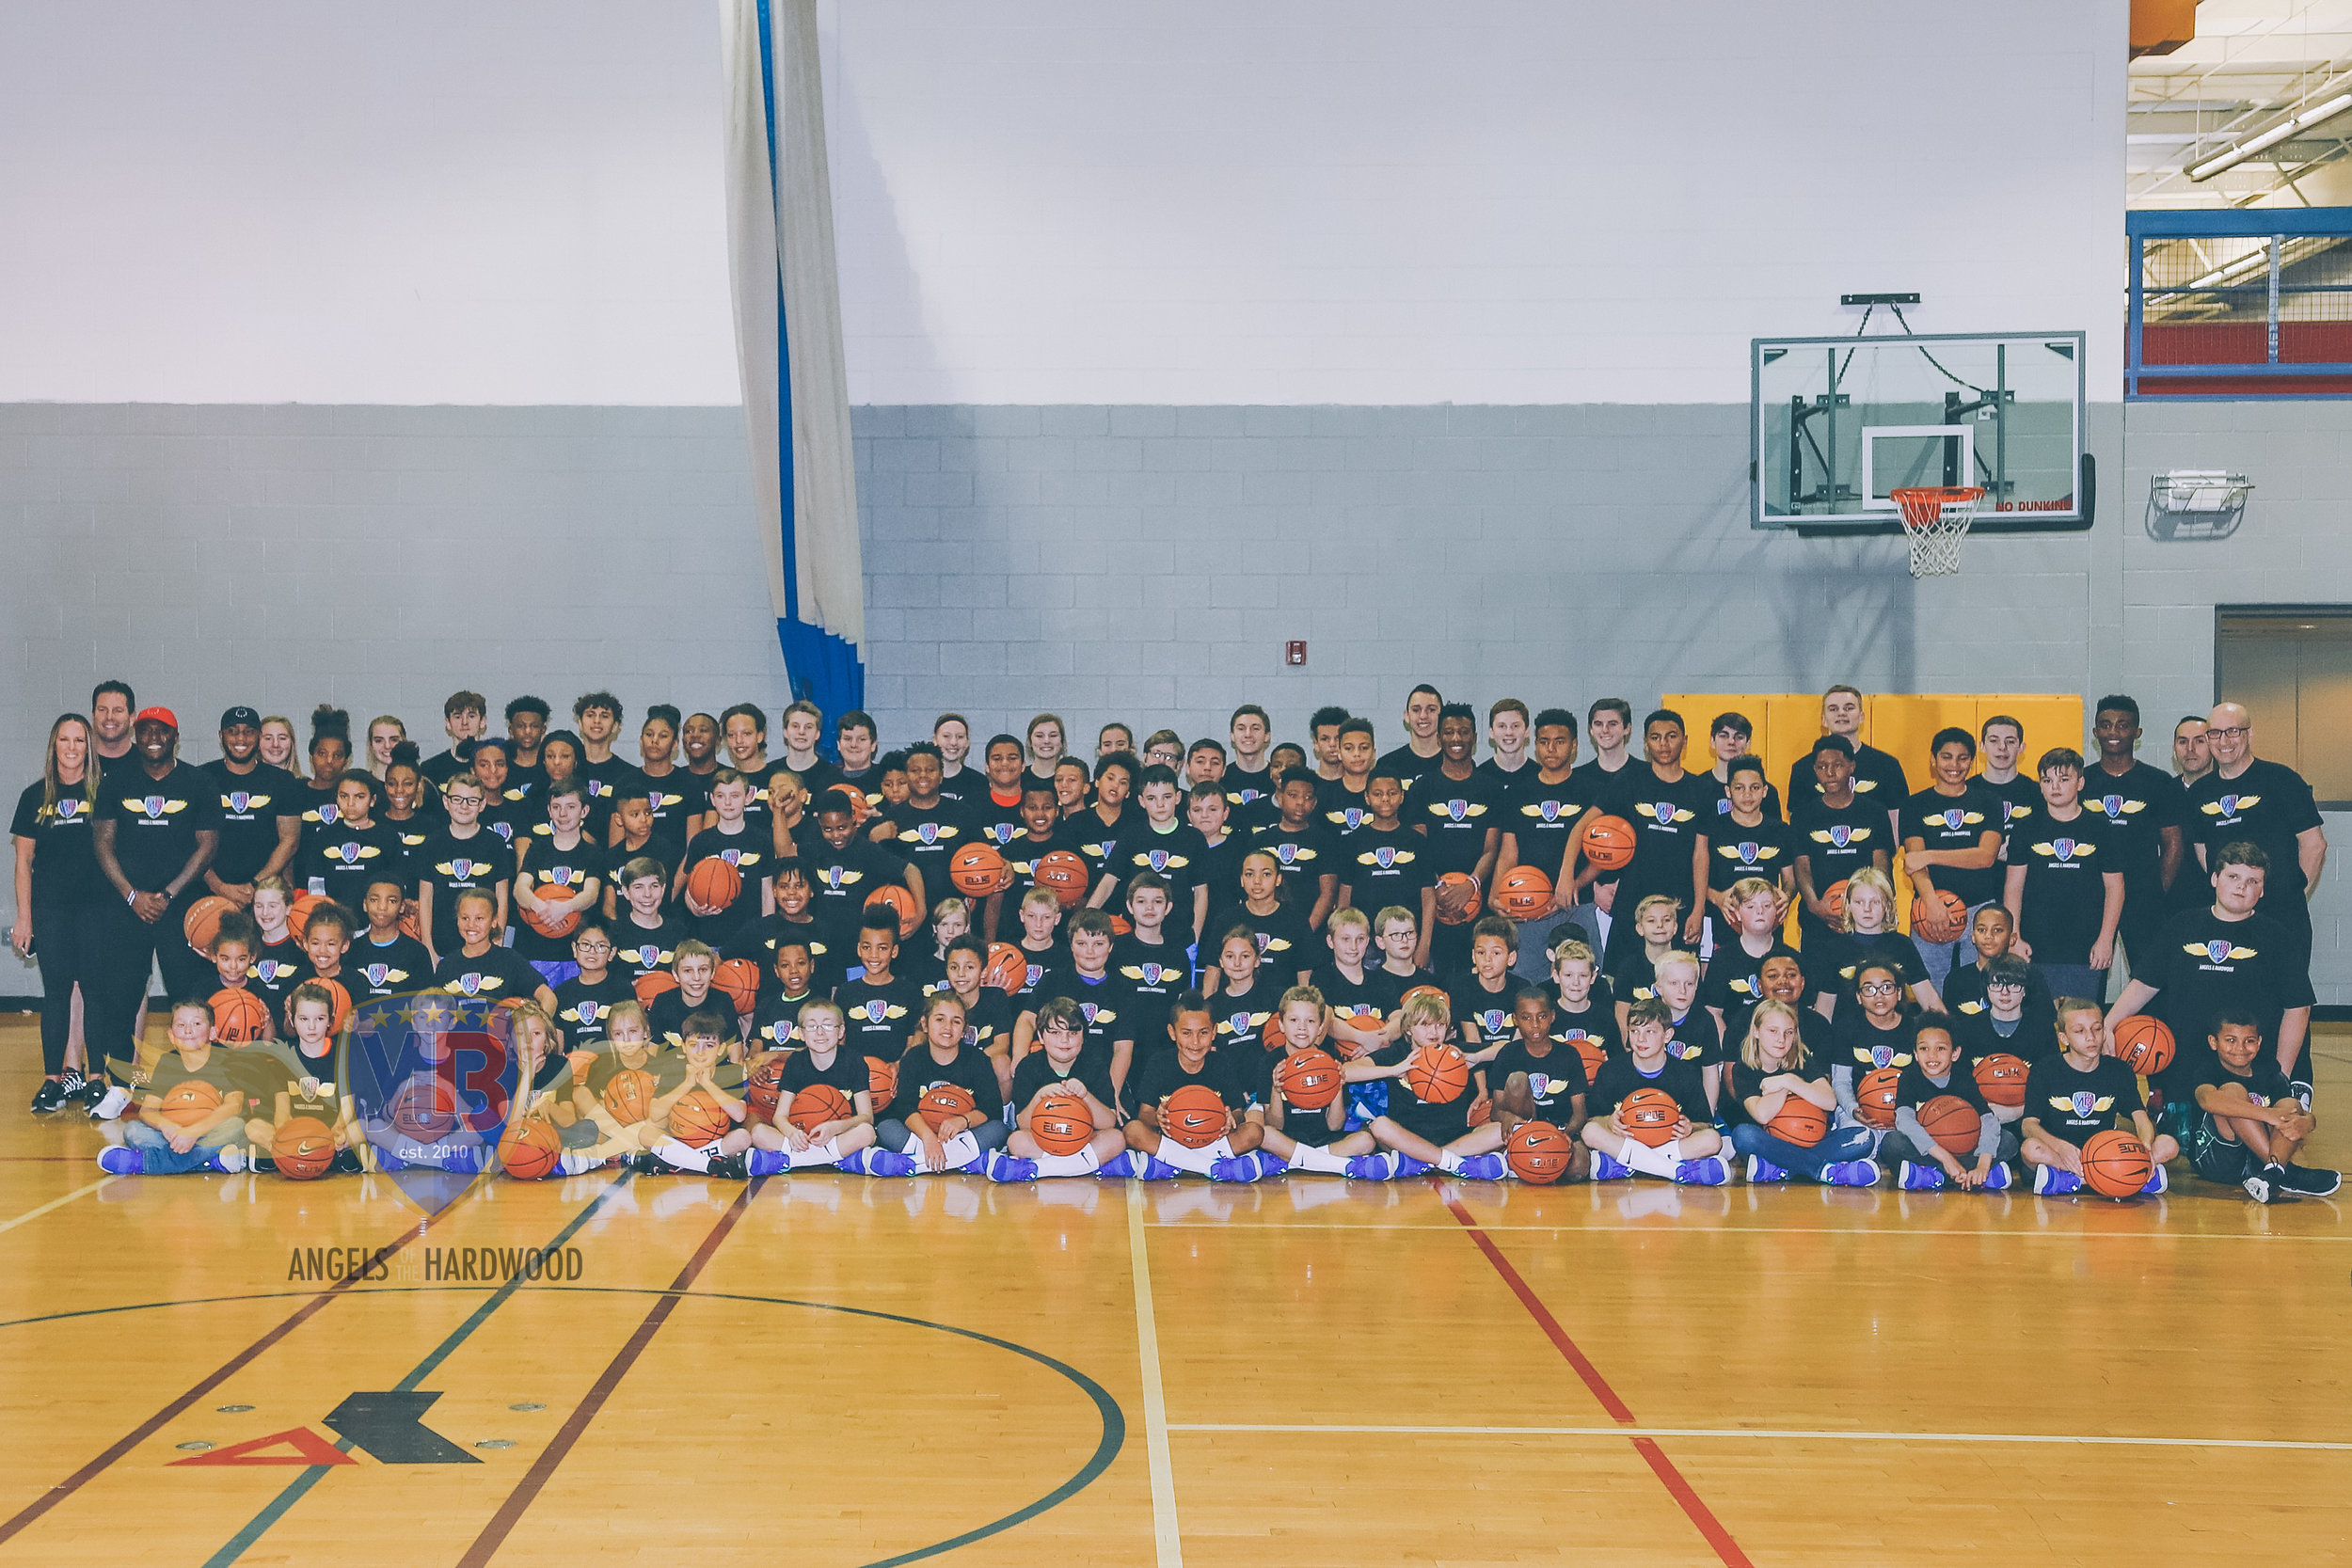 Angels of the Hardwood — The Basketball Movement